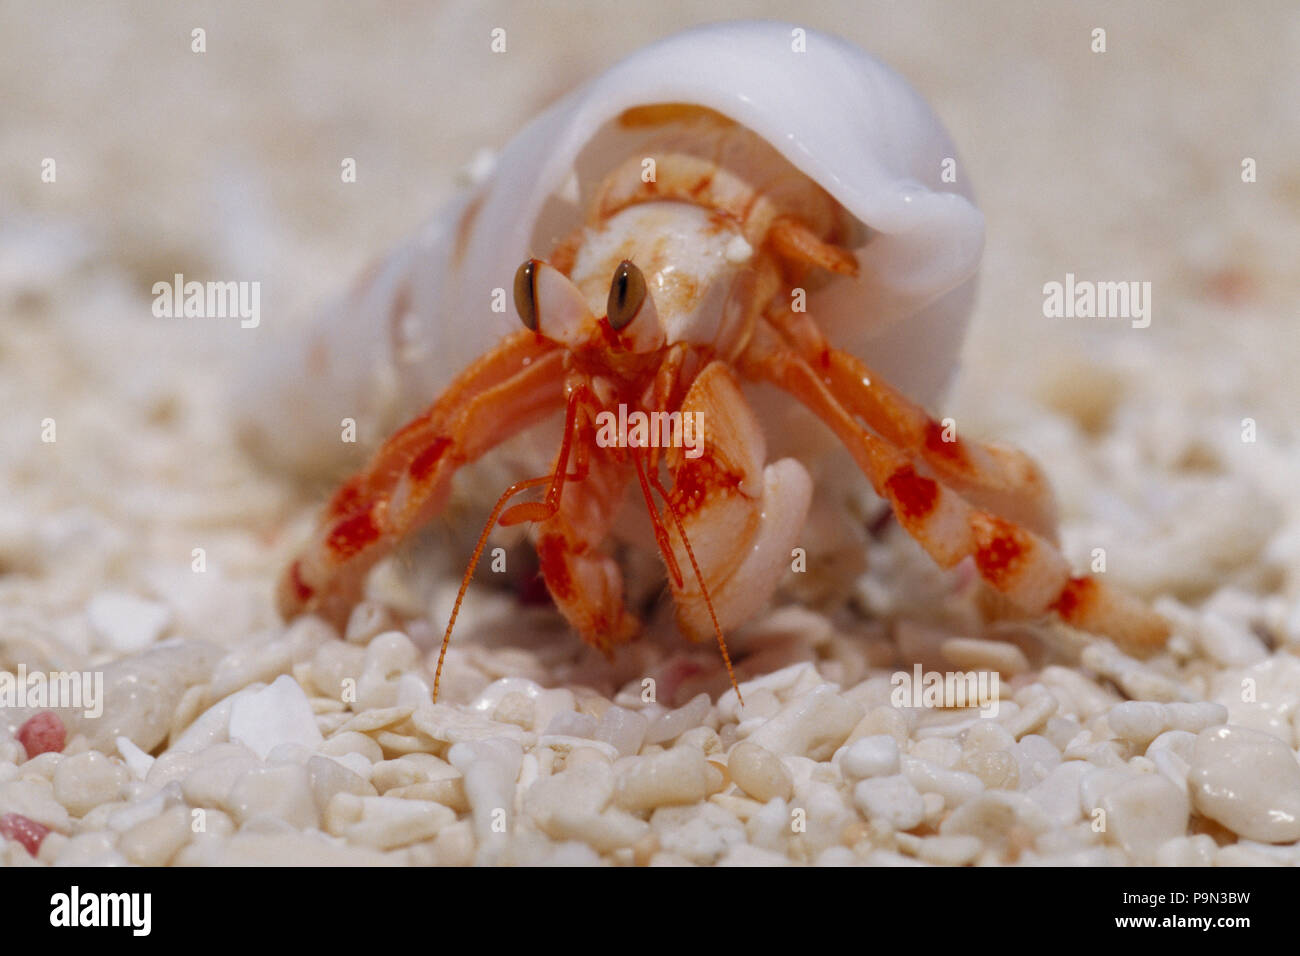 A strawberry land hermit crab emerging from its shell on a sand beach. Stock Photo